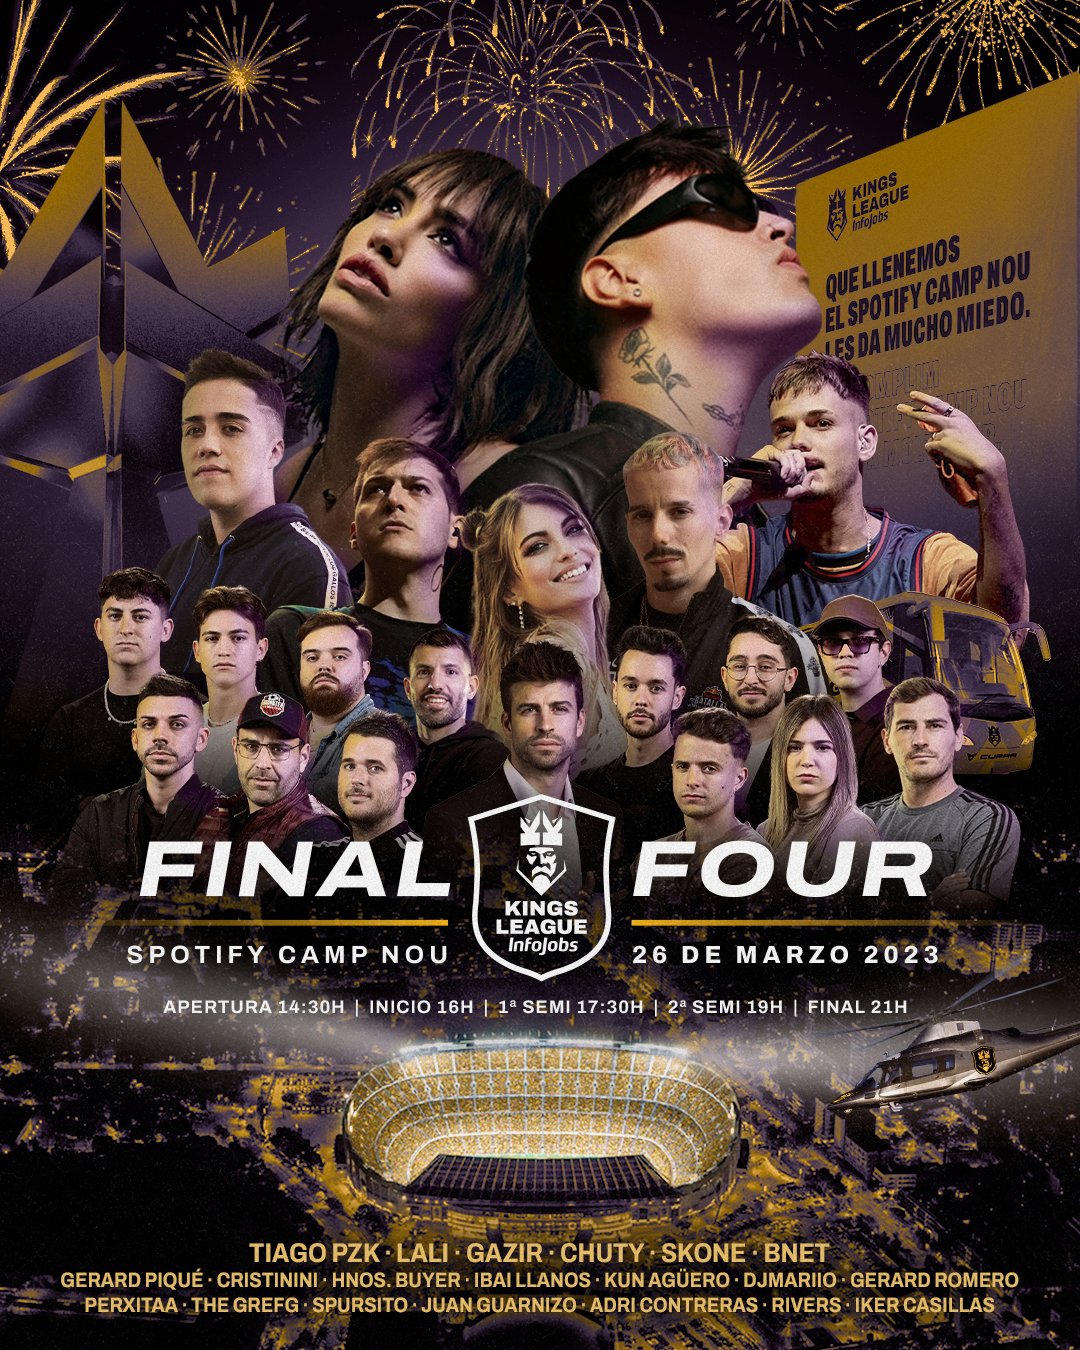 Crossings, schedules and links to watch the Final Four of the Kings League live at the Camp Nou